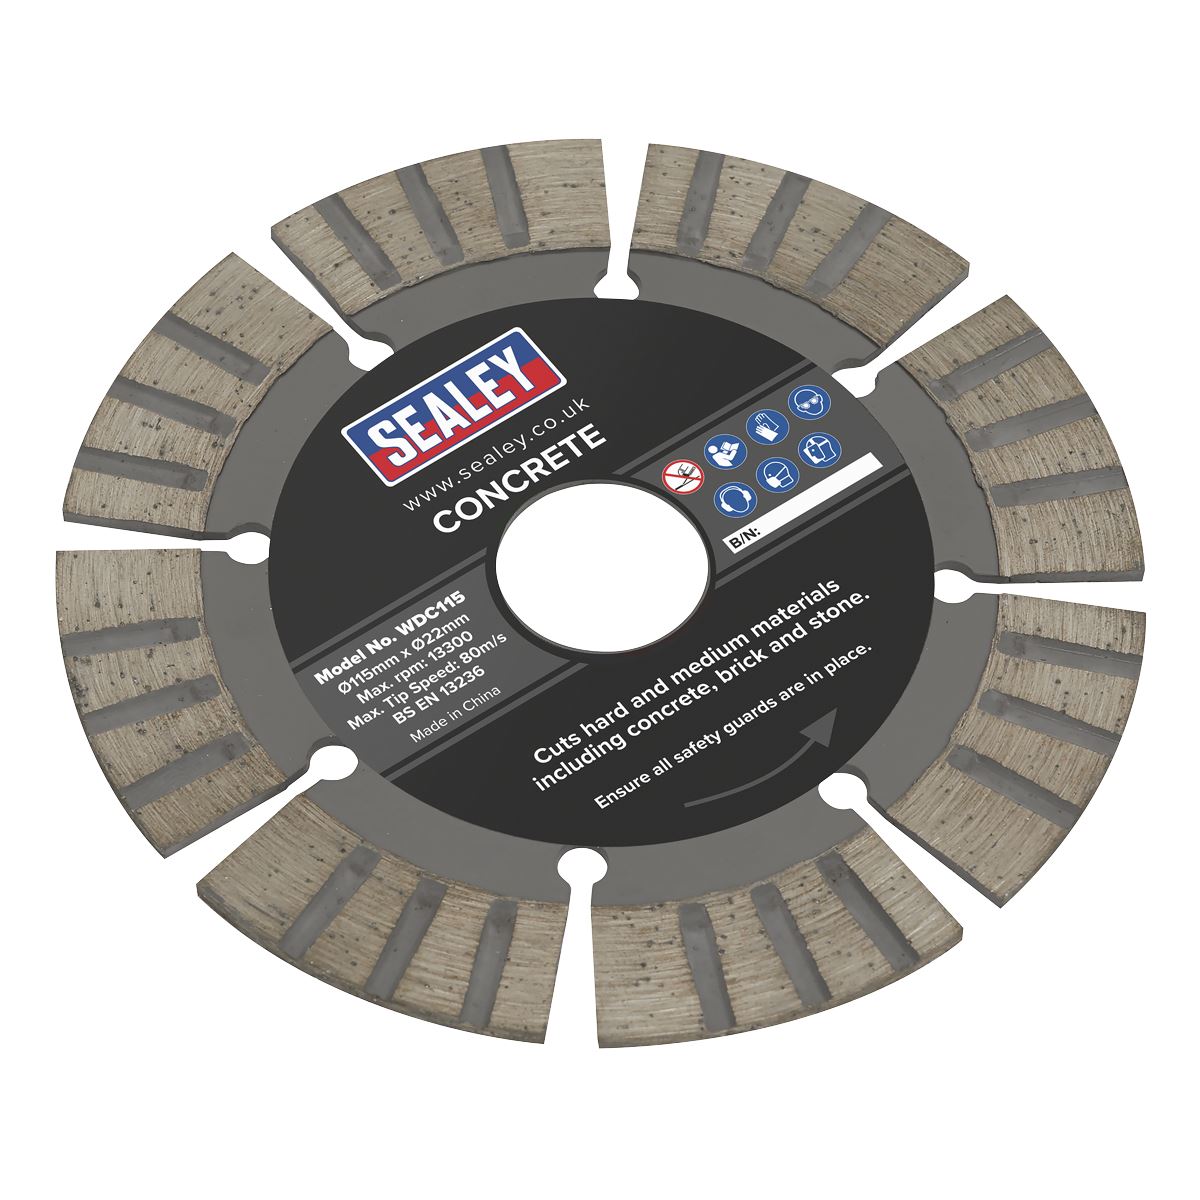 Sealey Concrete Cutting Disc Wet and Dry Use Ø115mm